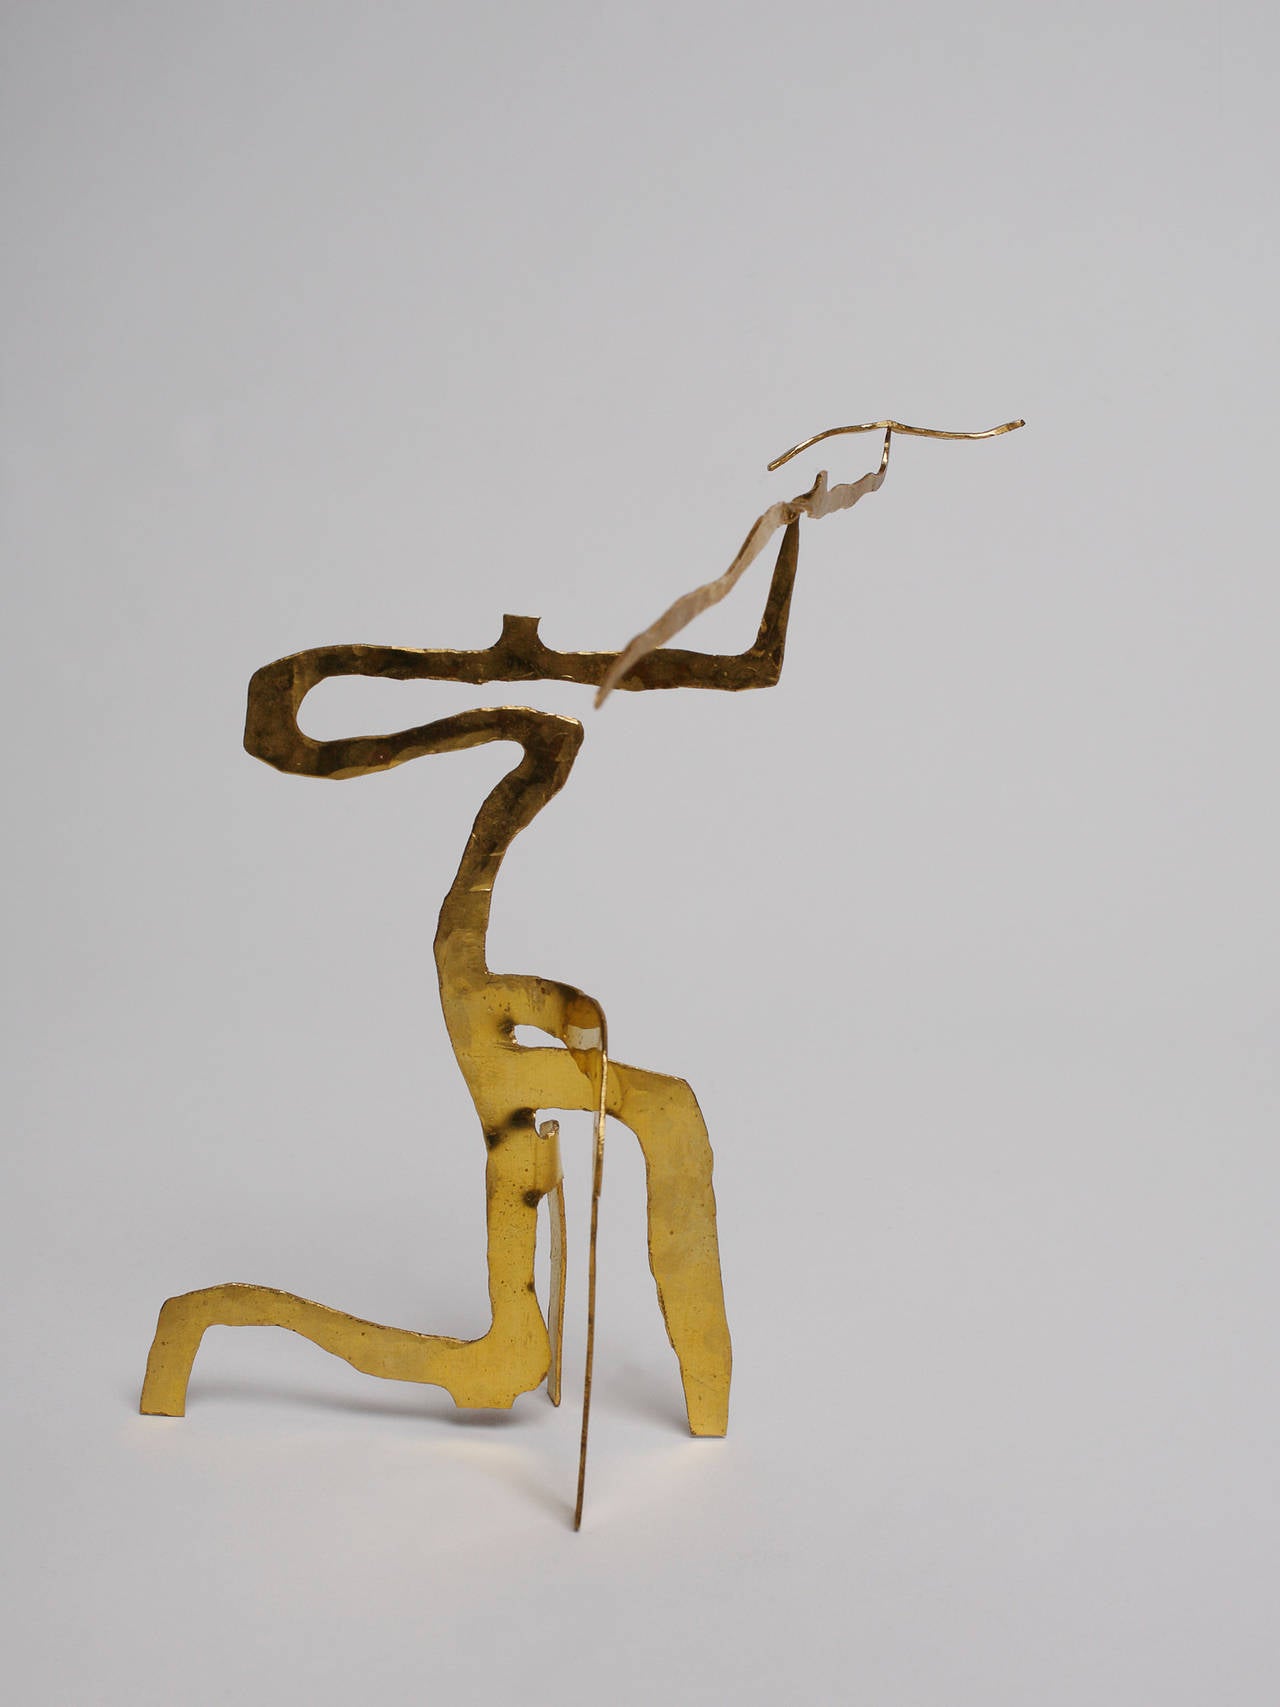 A handcrafted stabile sculpture composed of 3 pieces balancing one on the other from a needle point. This piece is a miniature of a monumental stabile in wood created by the artist in 2011

The artist uses brass that he hand-hammers to give it